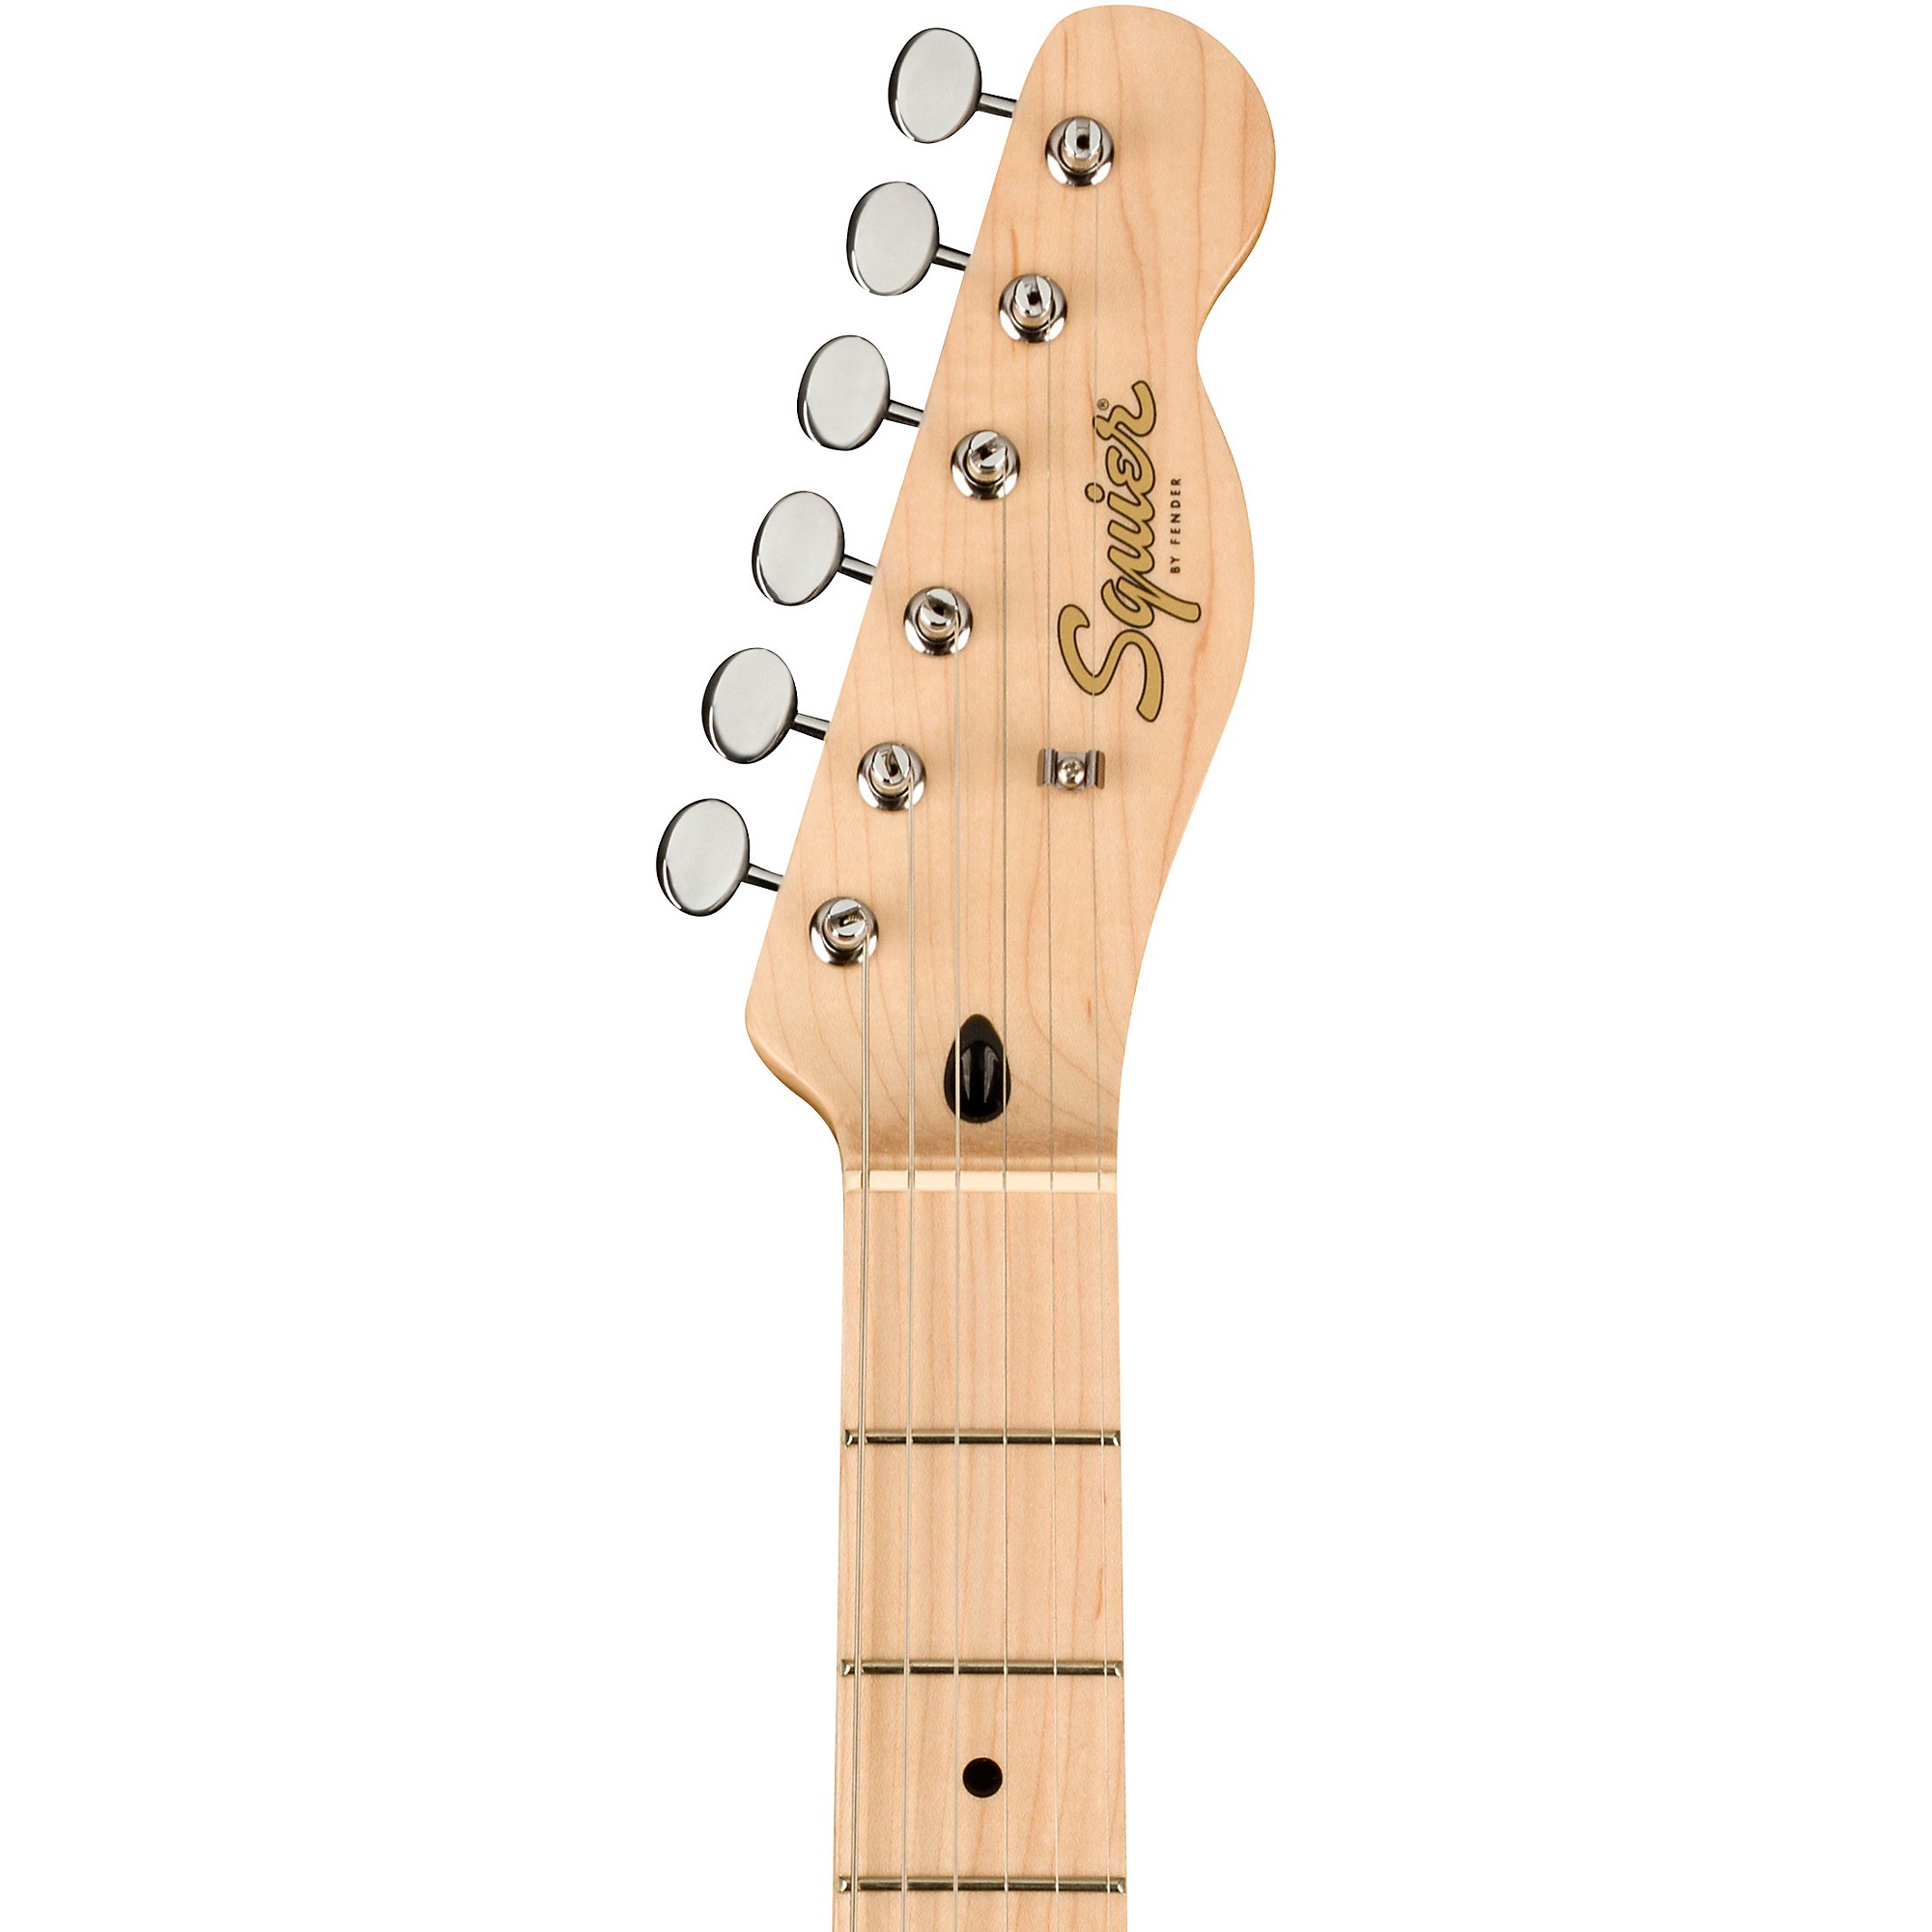 Squier Paranormal Series Offset Telecaster Maple Fingerboard